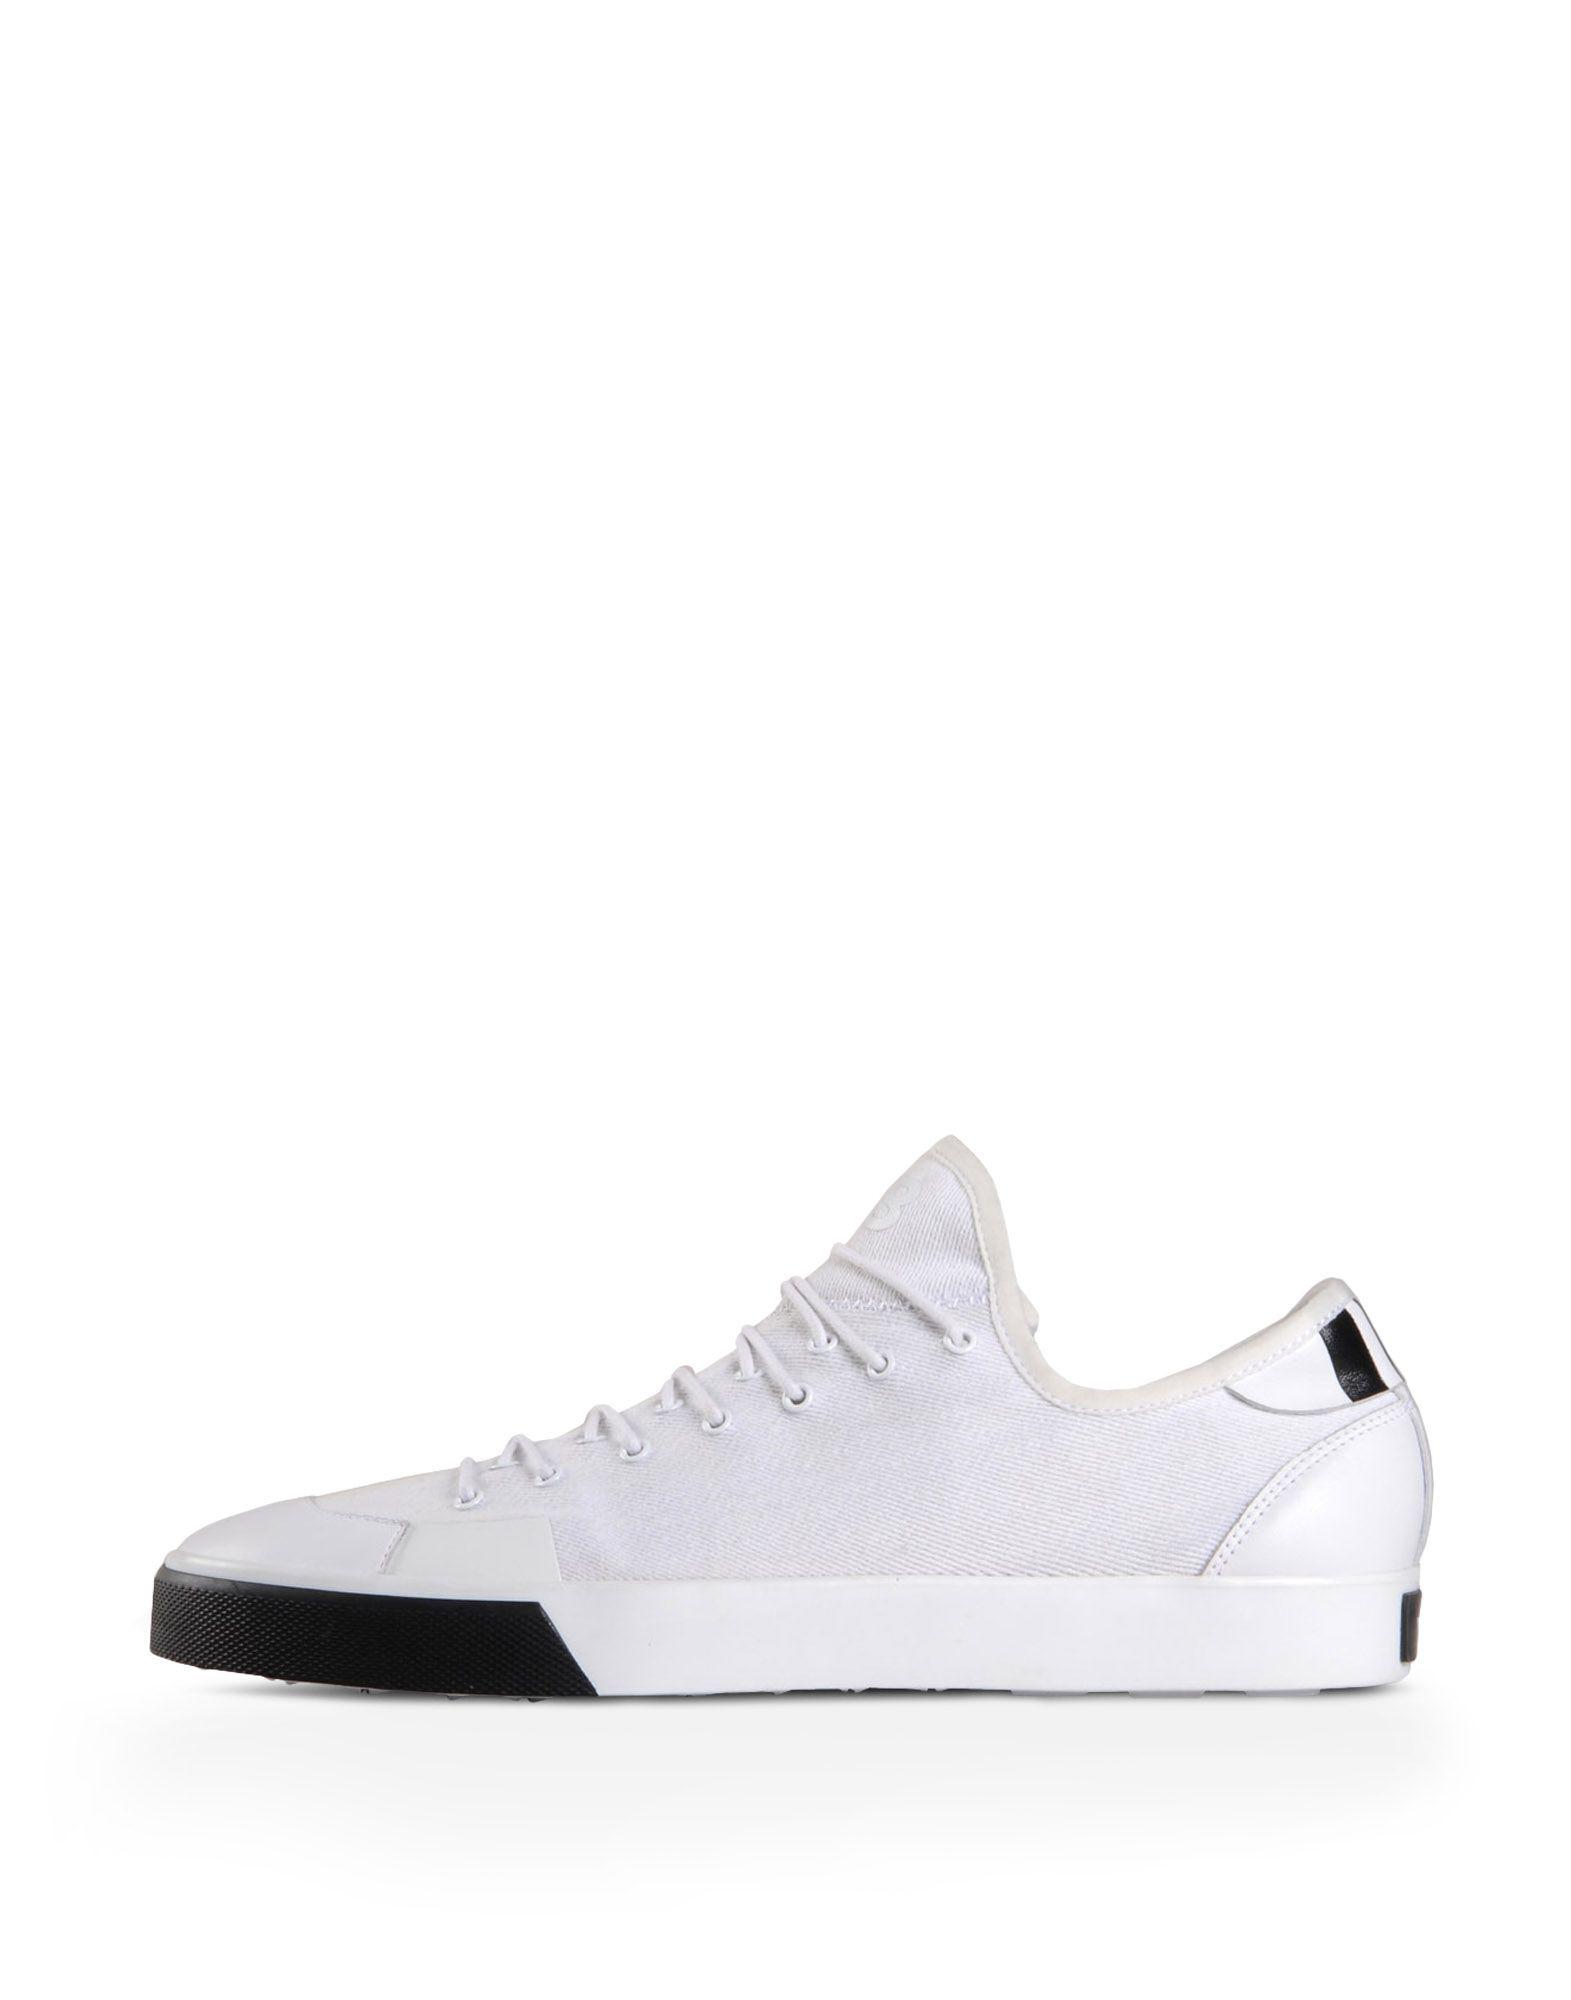 Y-3 Leather Sen Low Sneakers in White for Men - Lyst